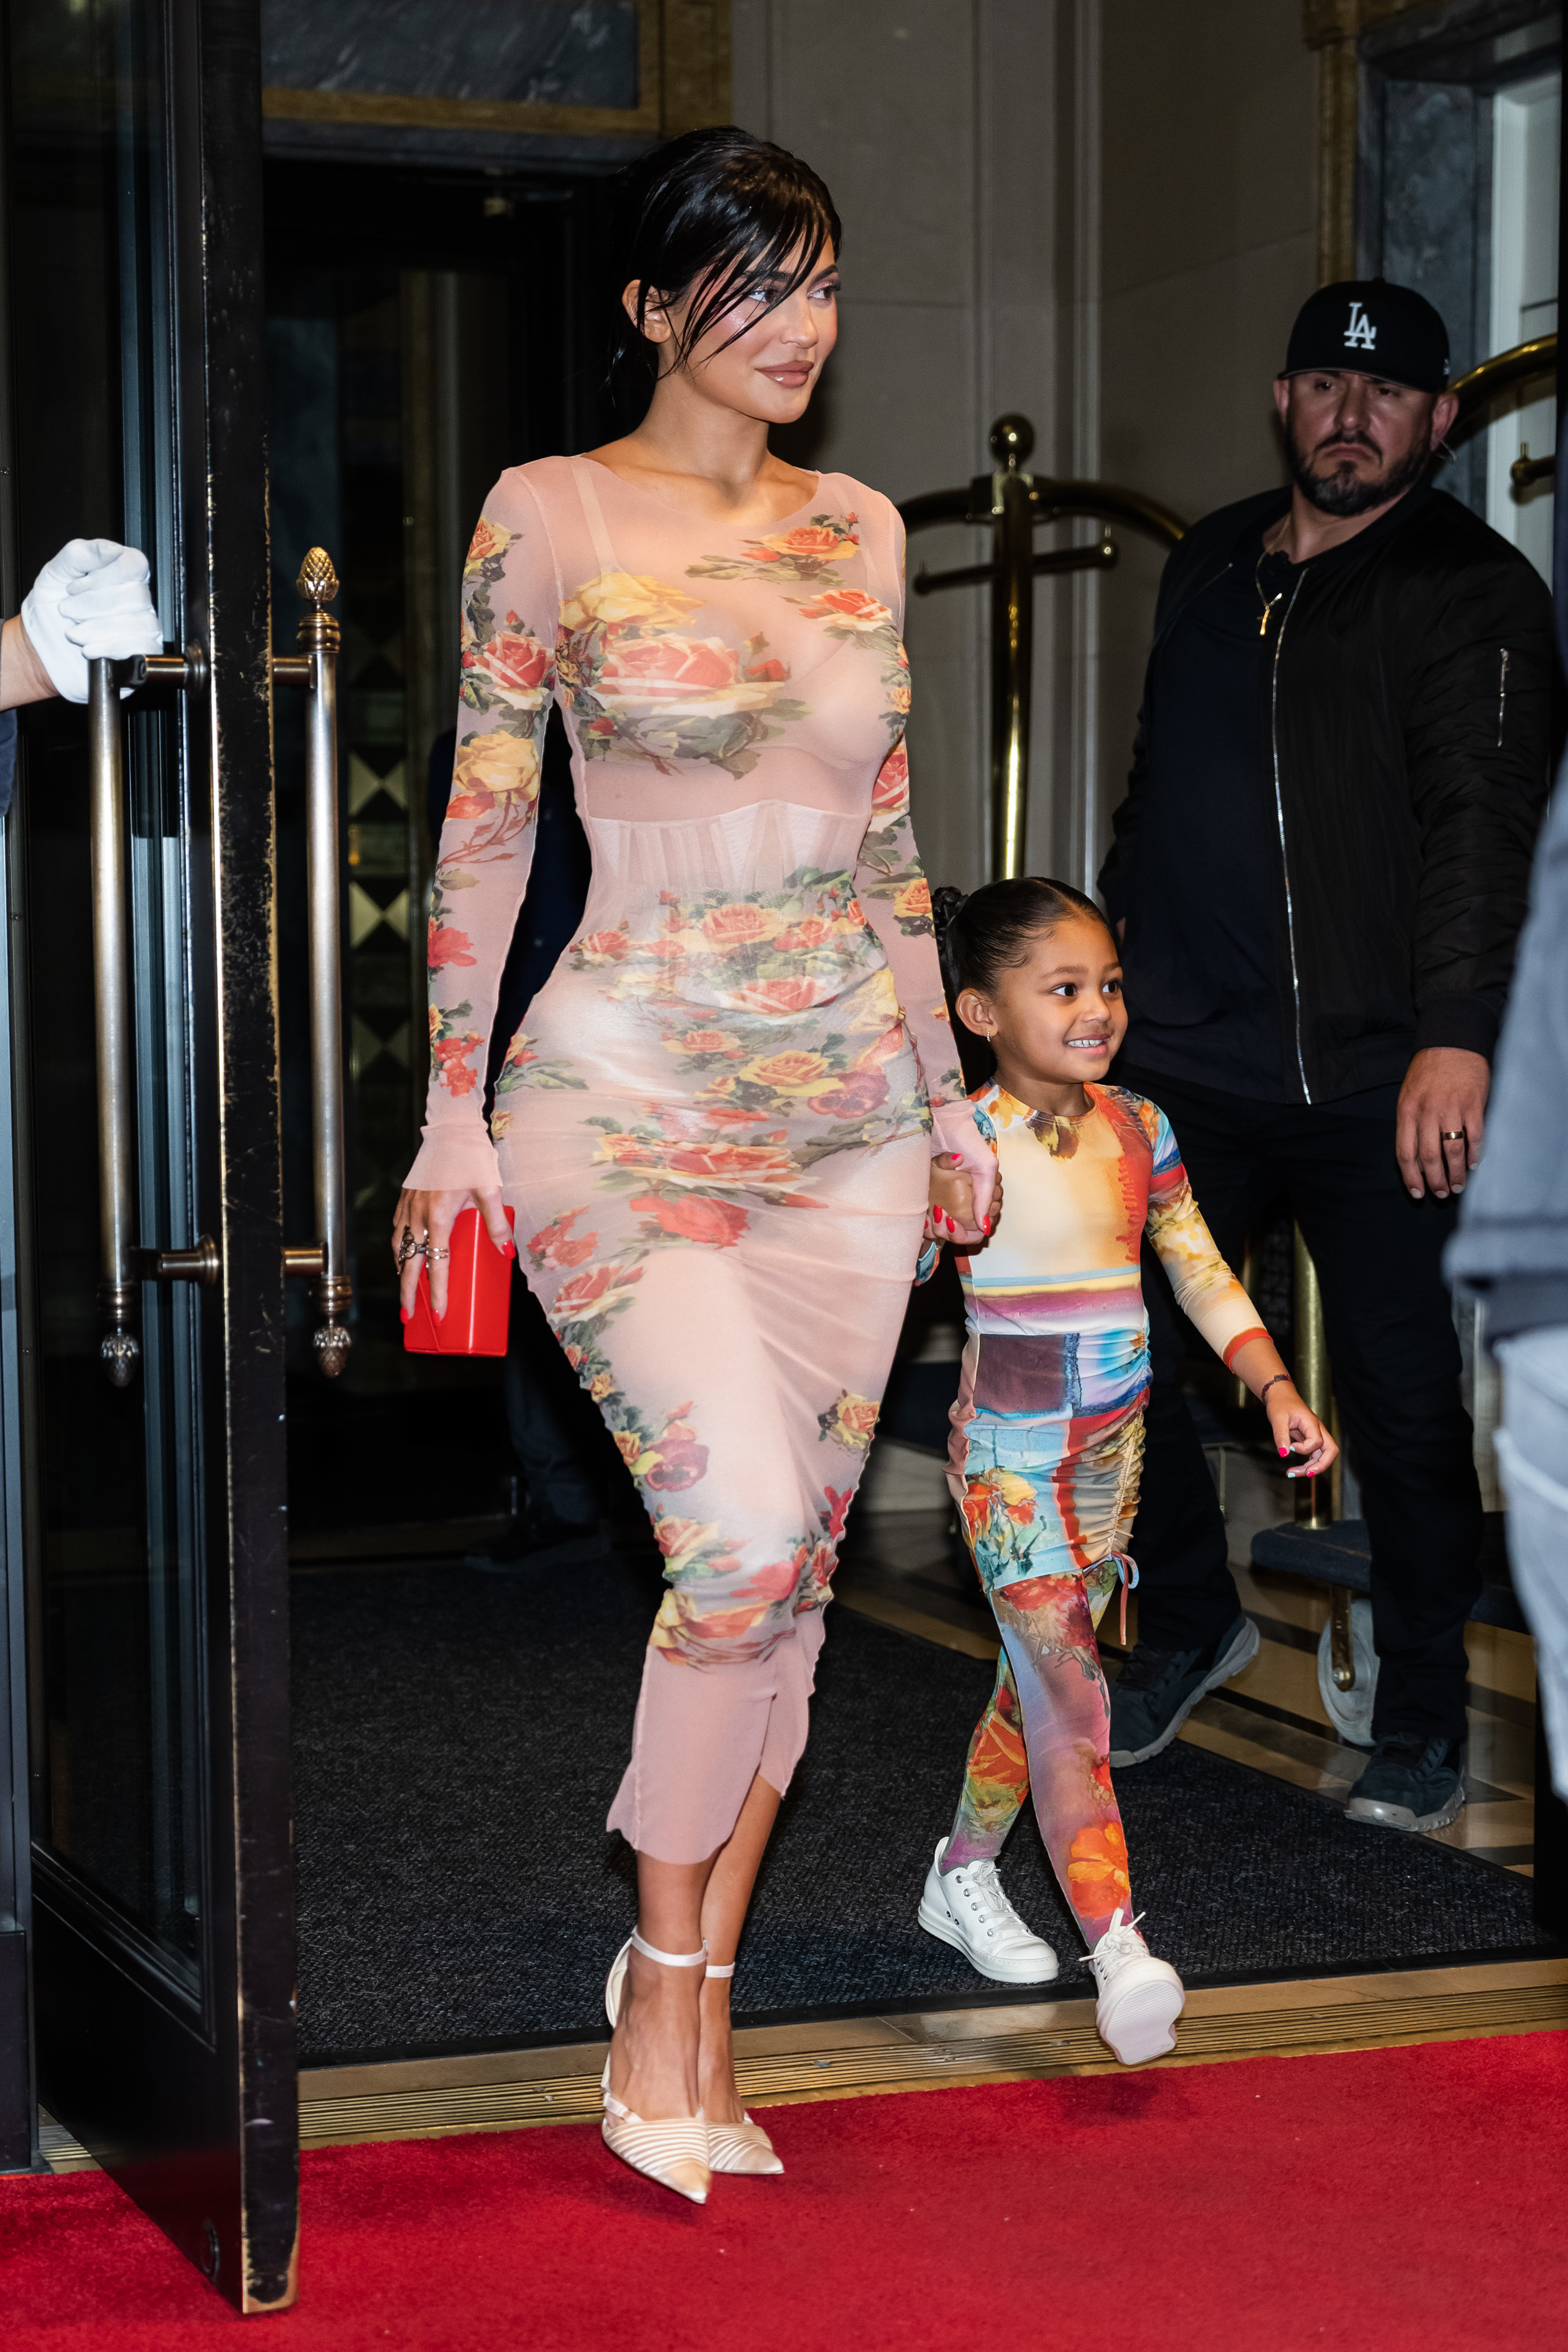 Kylie and Stormi exiting a building